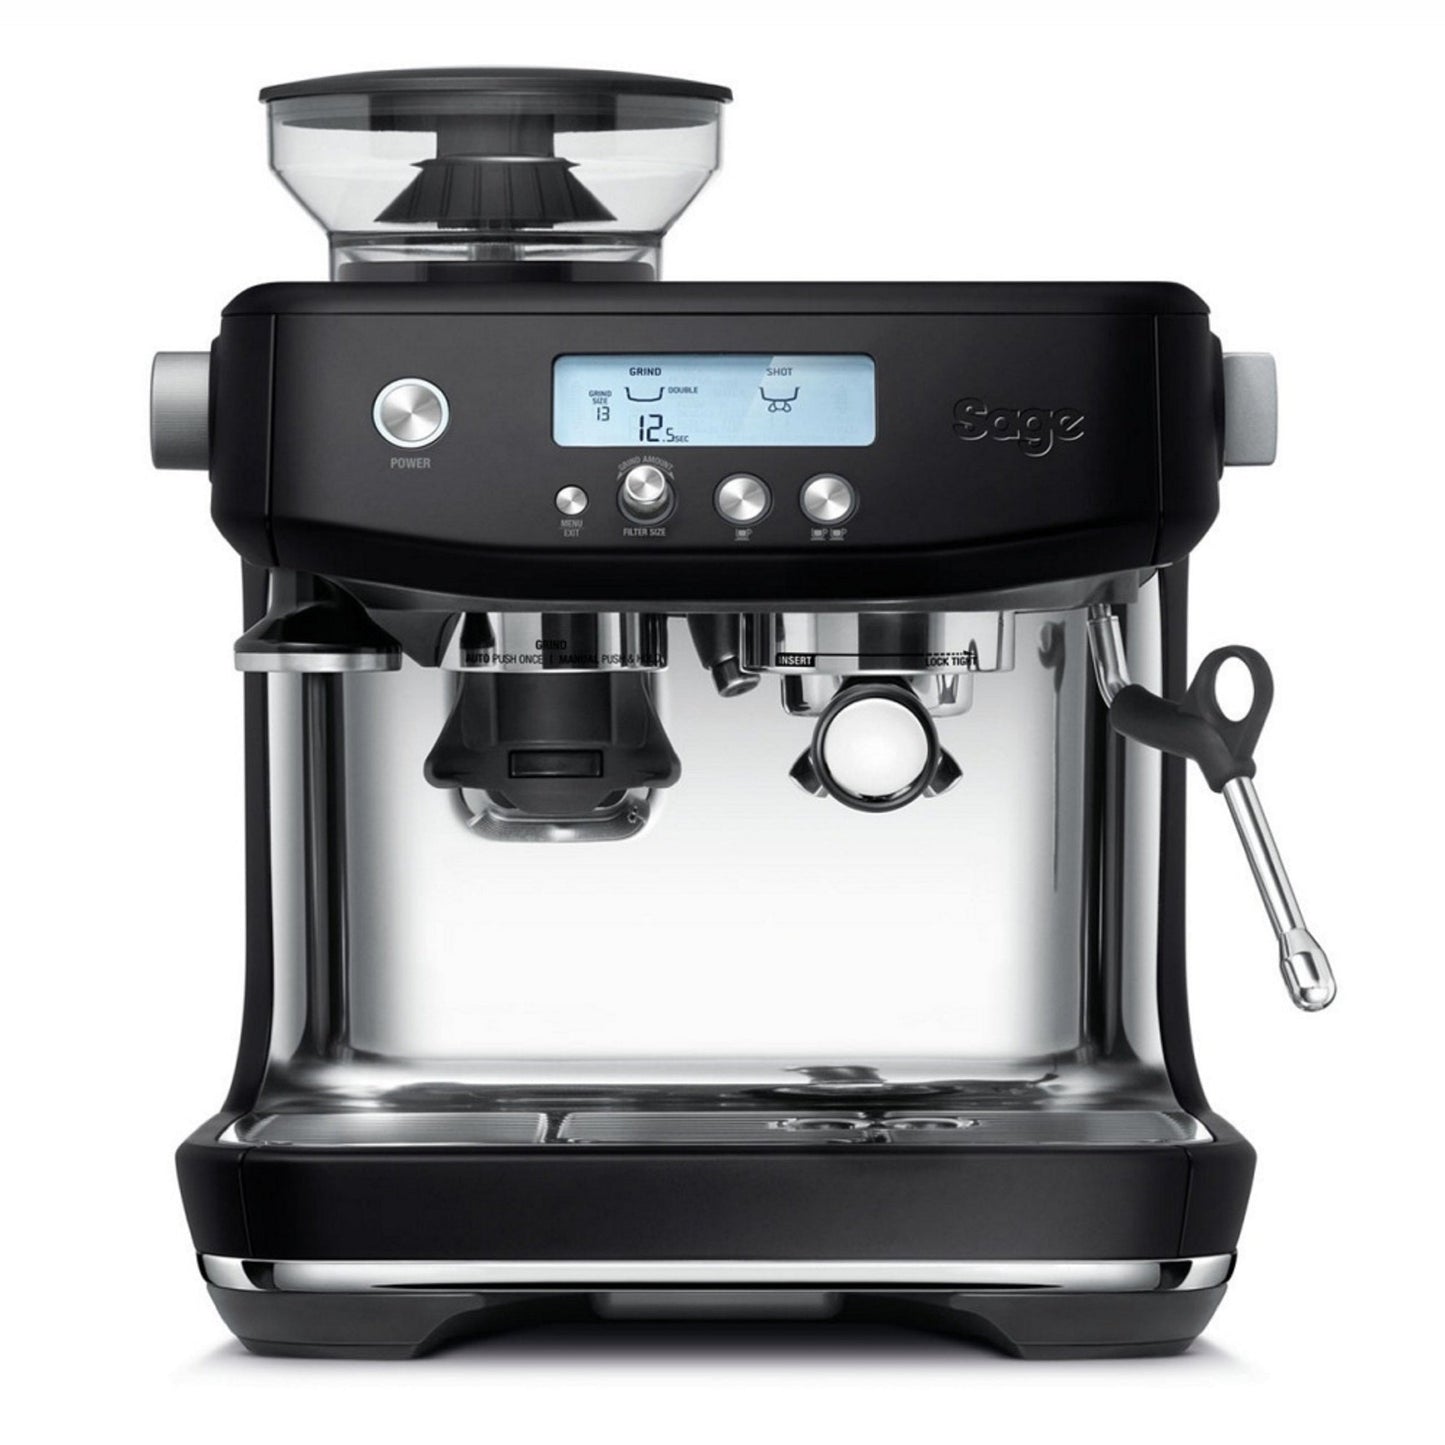 Load image into Gallery viewer, Sage Bean to Cup Coffee Machine - The Barista Pro - Velo Coffee Roasters
